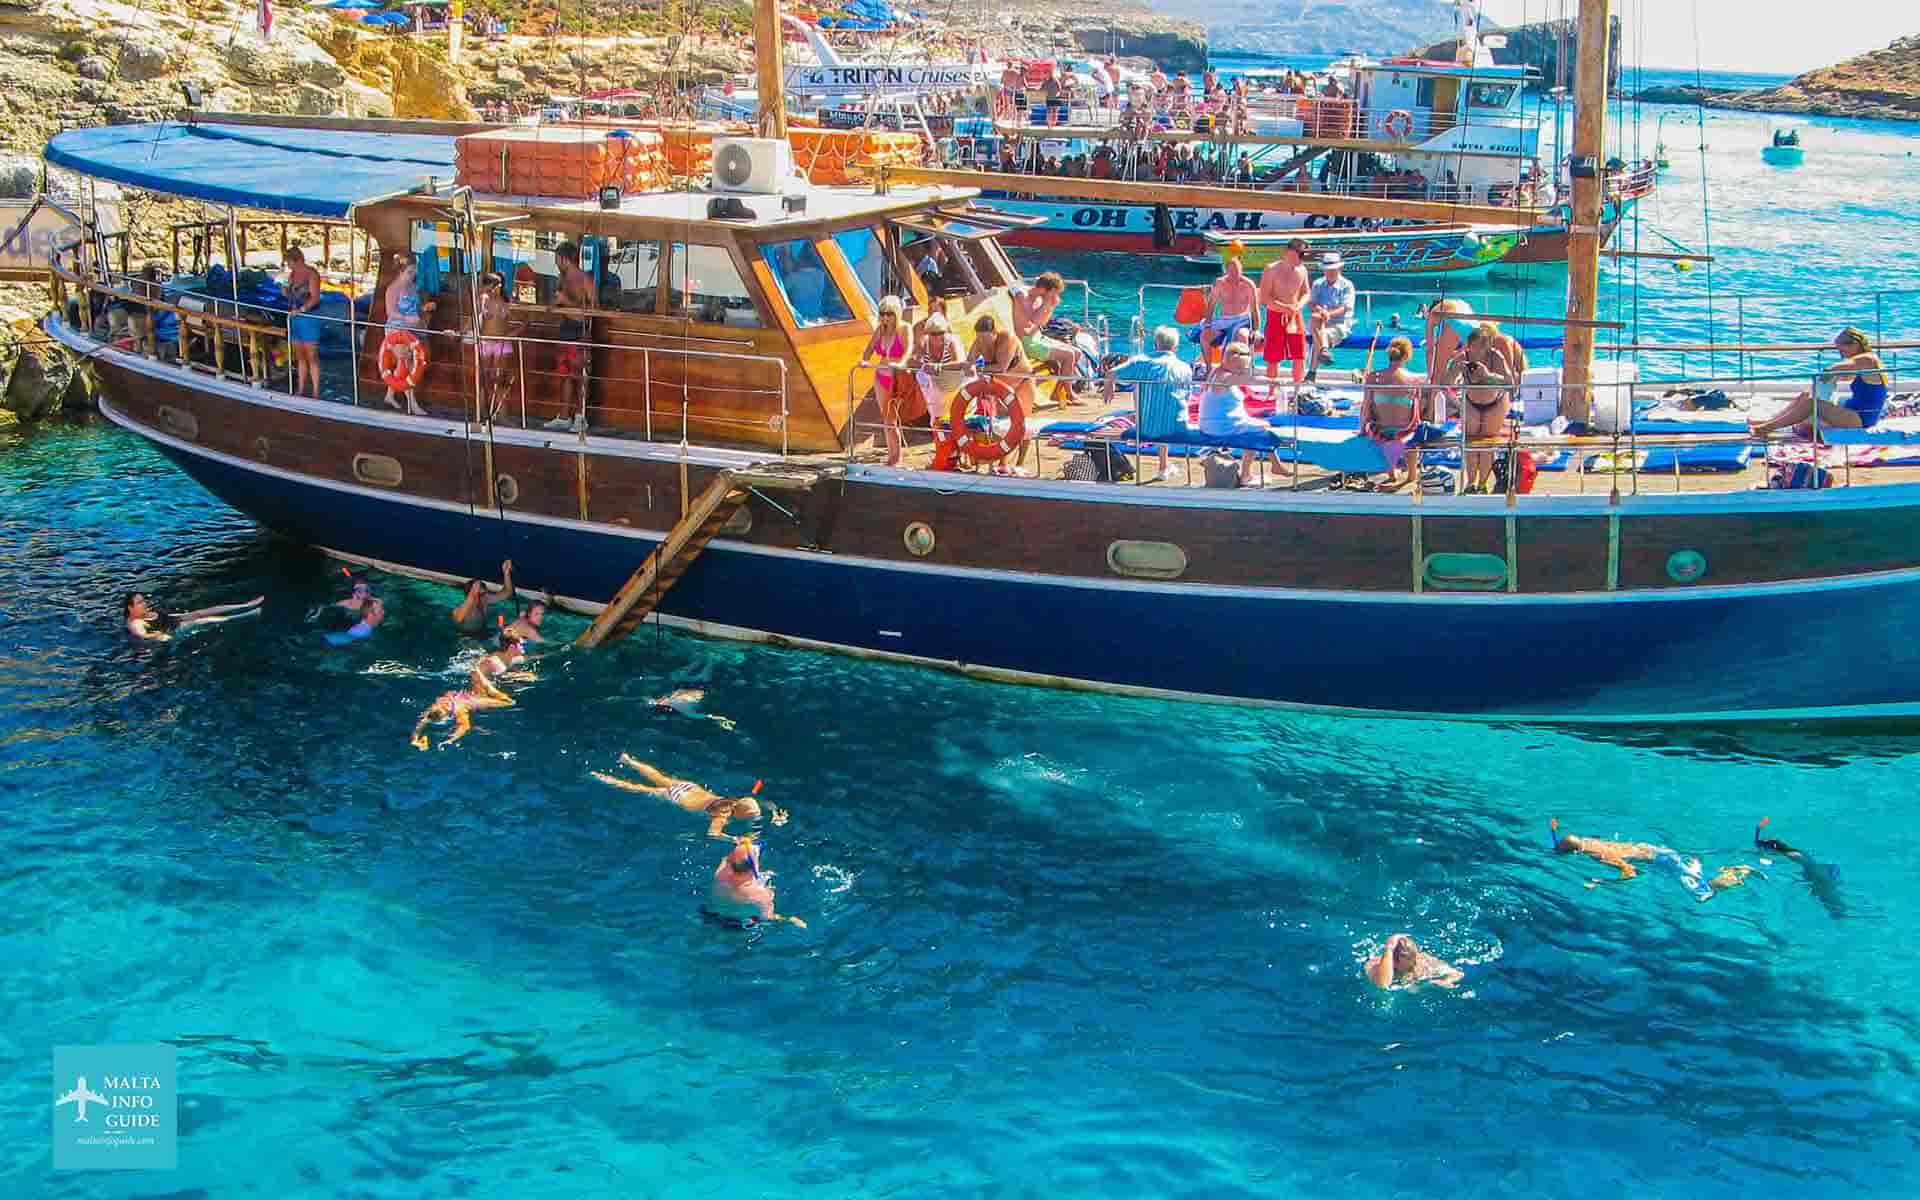 People swimming and standing on one of the boats moored at Comino island.